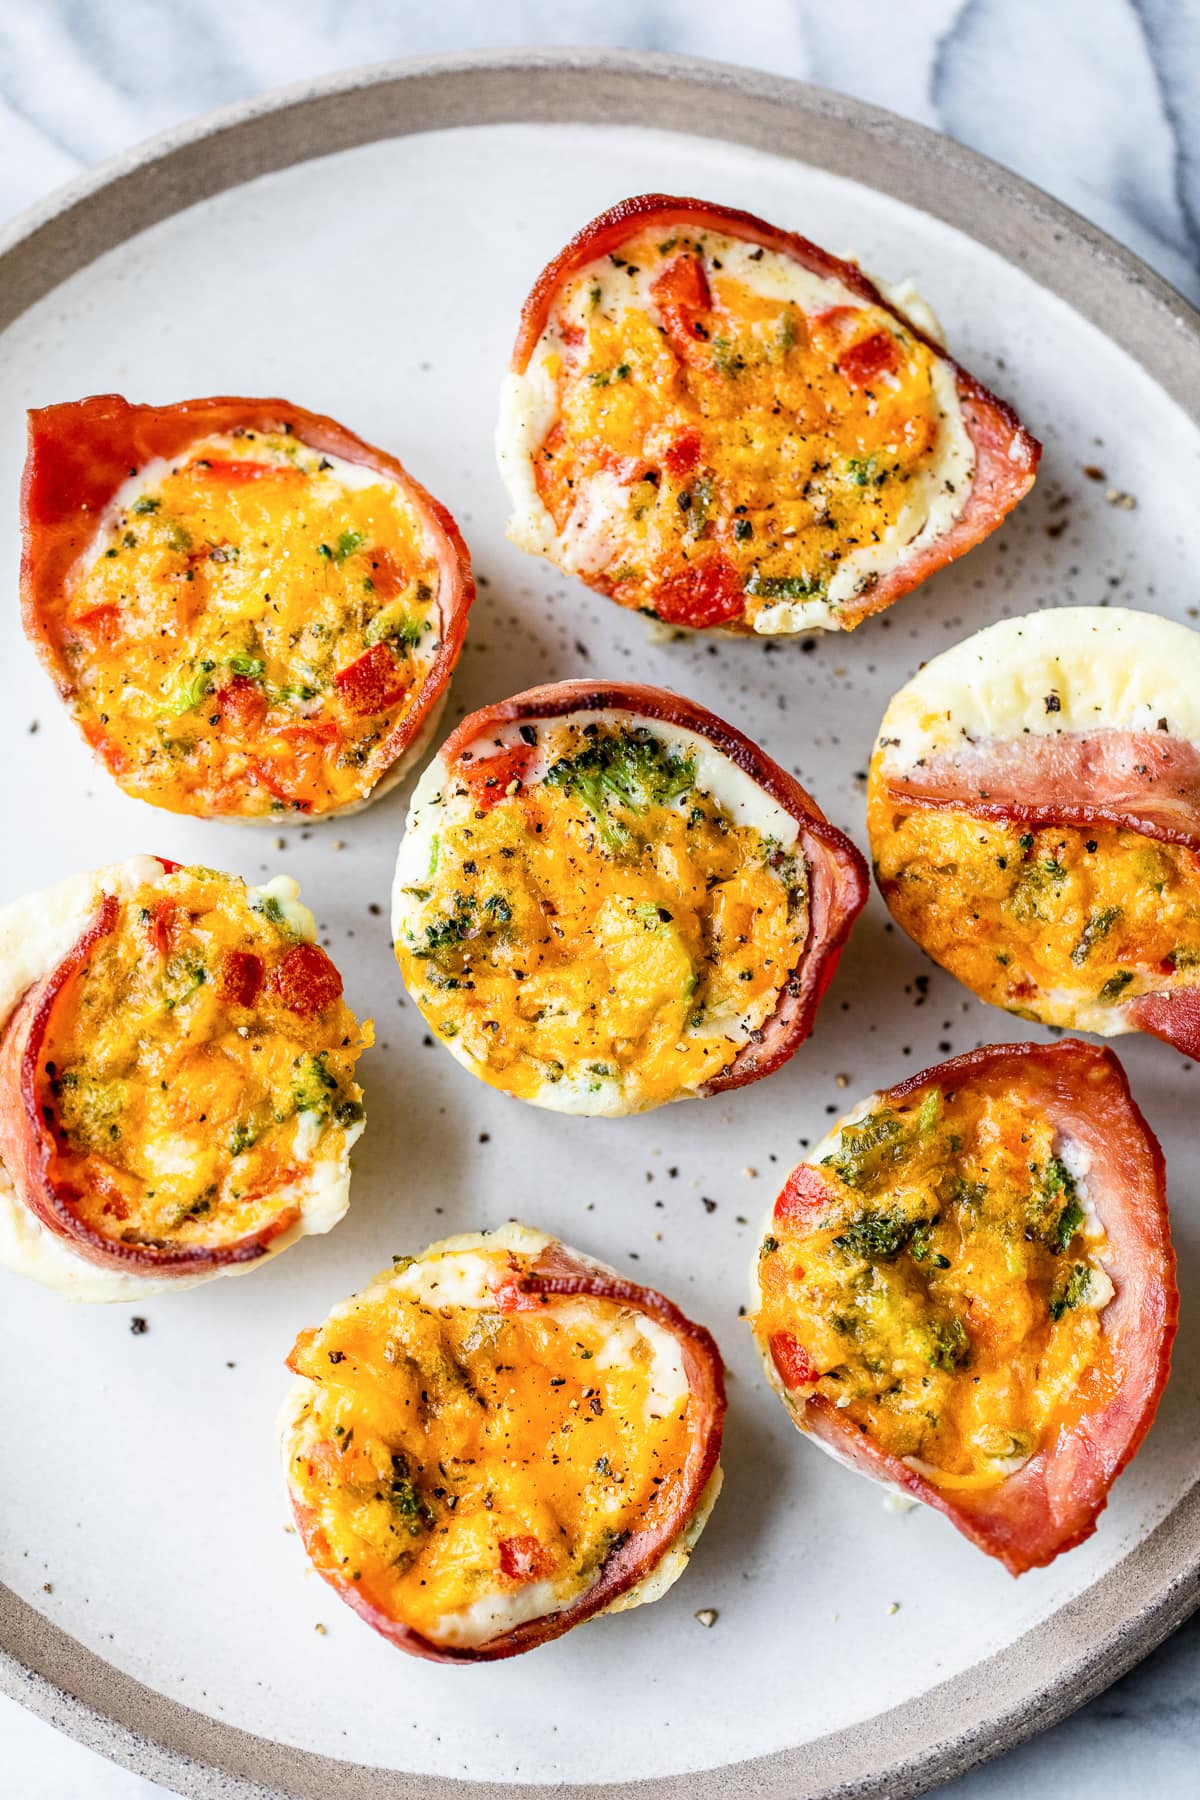 Egg muffin with turkey bacon, cottage cheese and vegetables